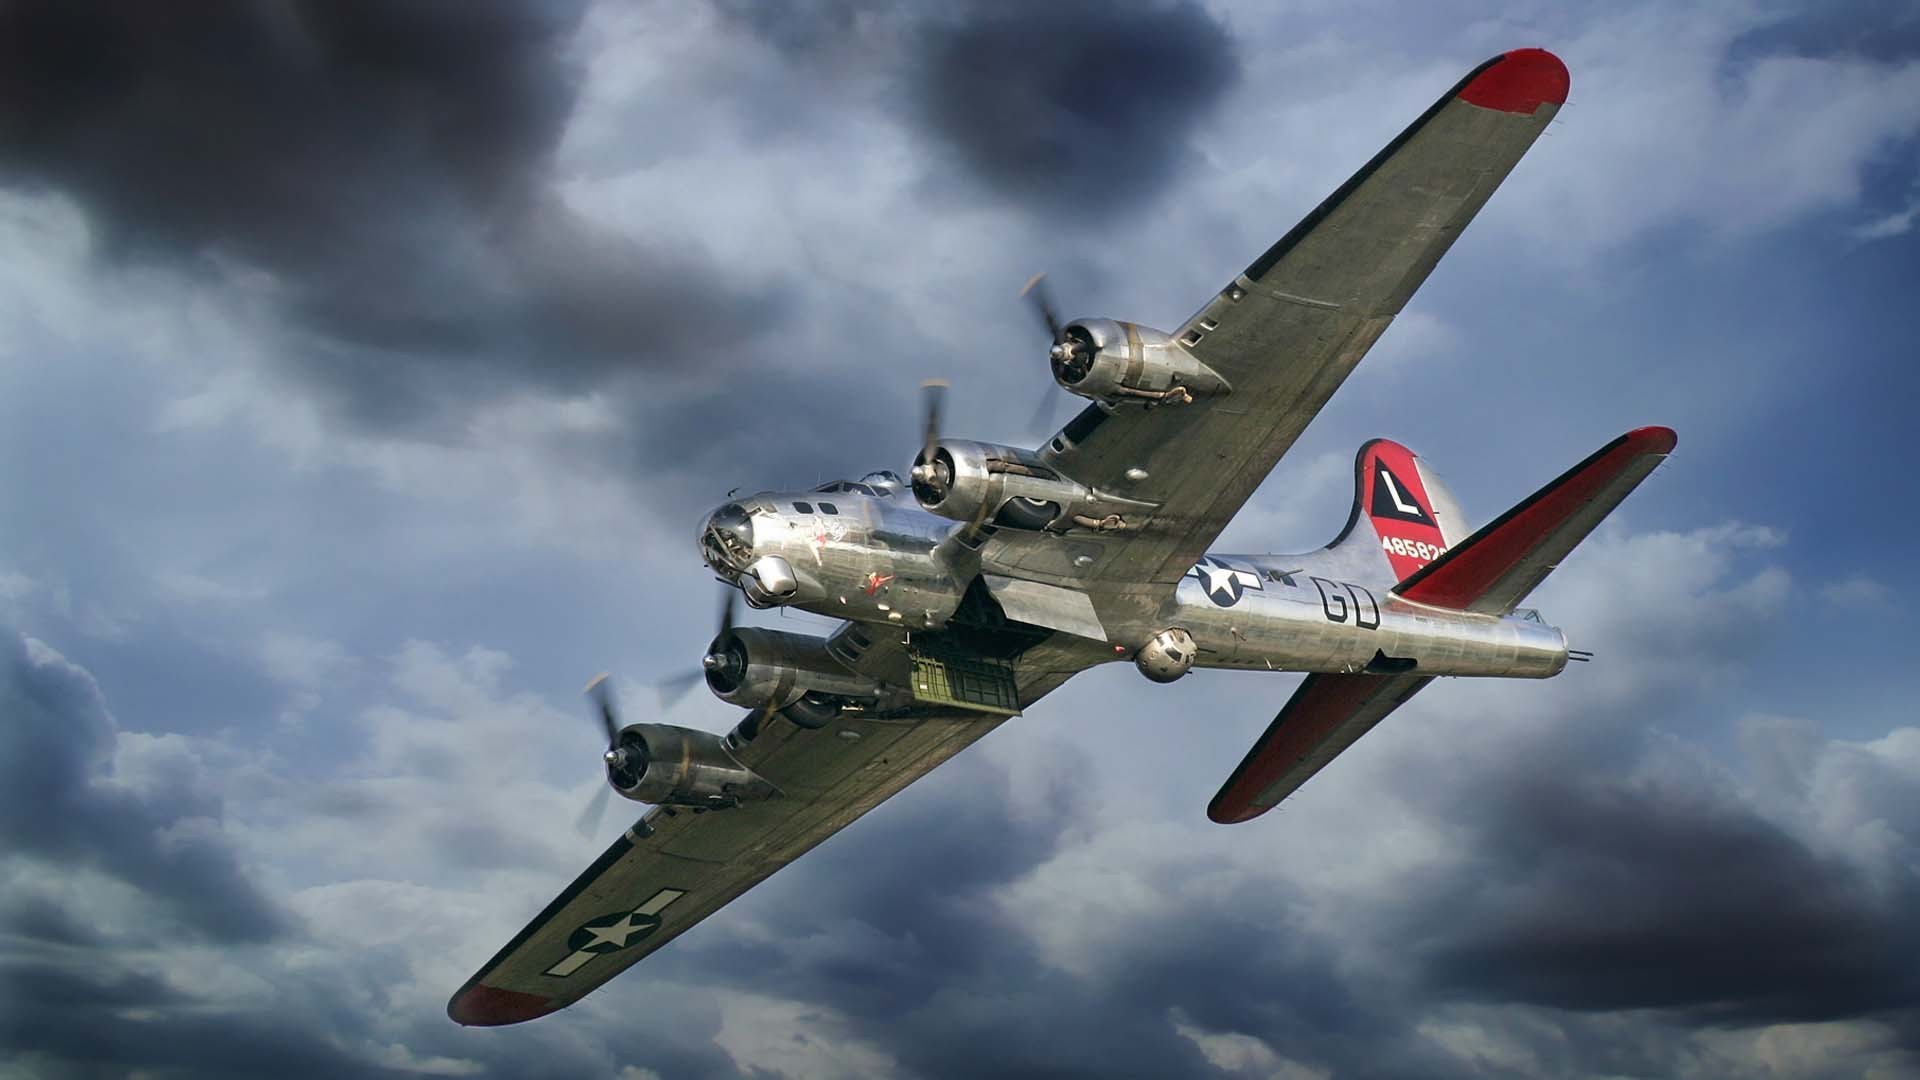 1920x1080 Military - Boeing B-17 Flying Fortress Air Force Aircraft Airplane Wallpaper